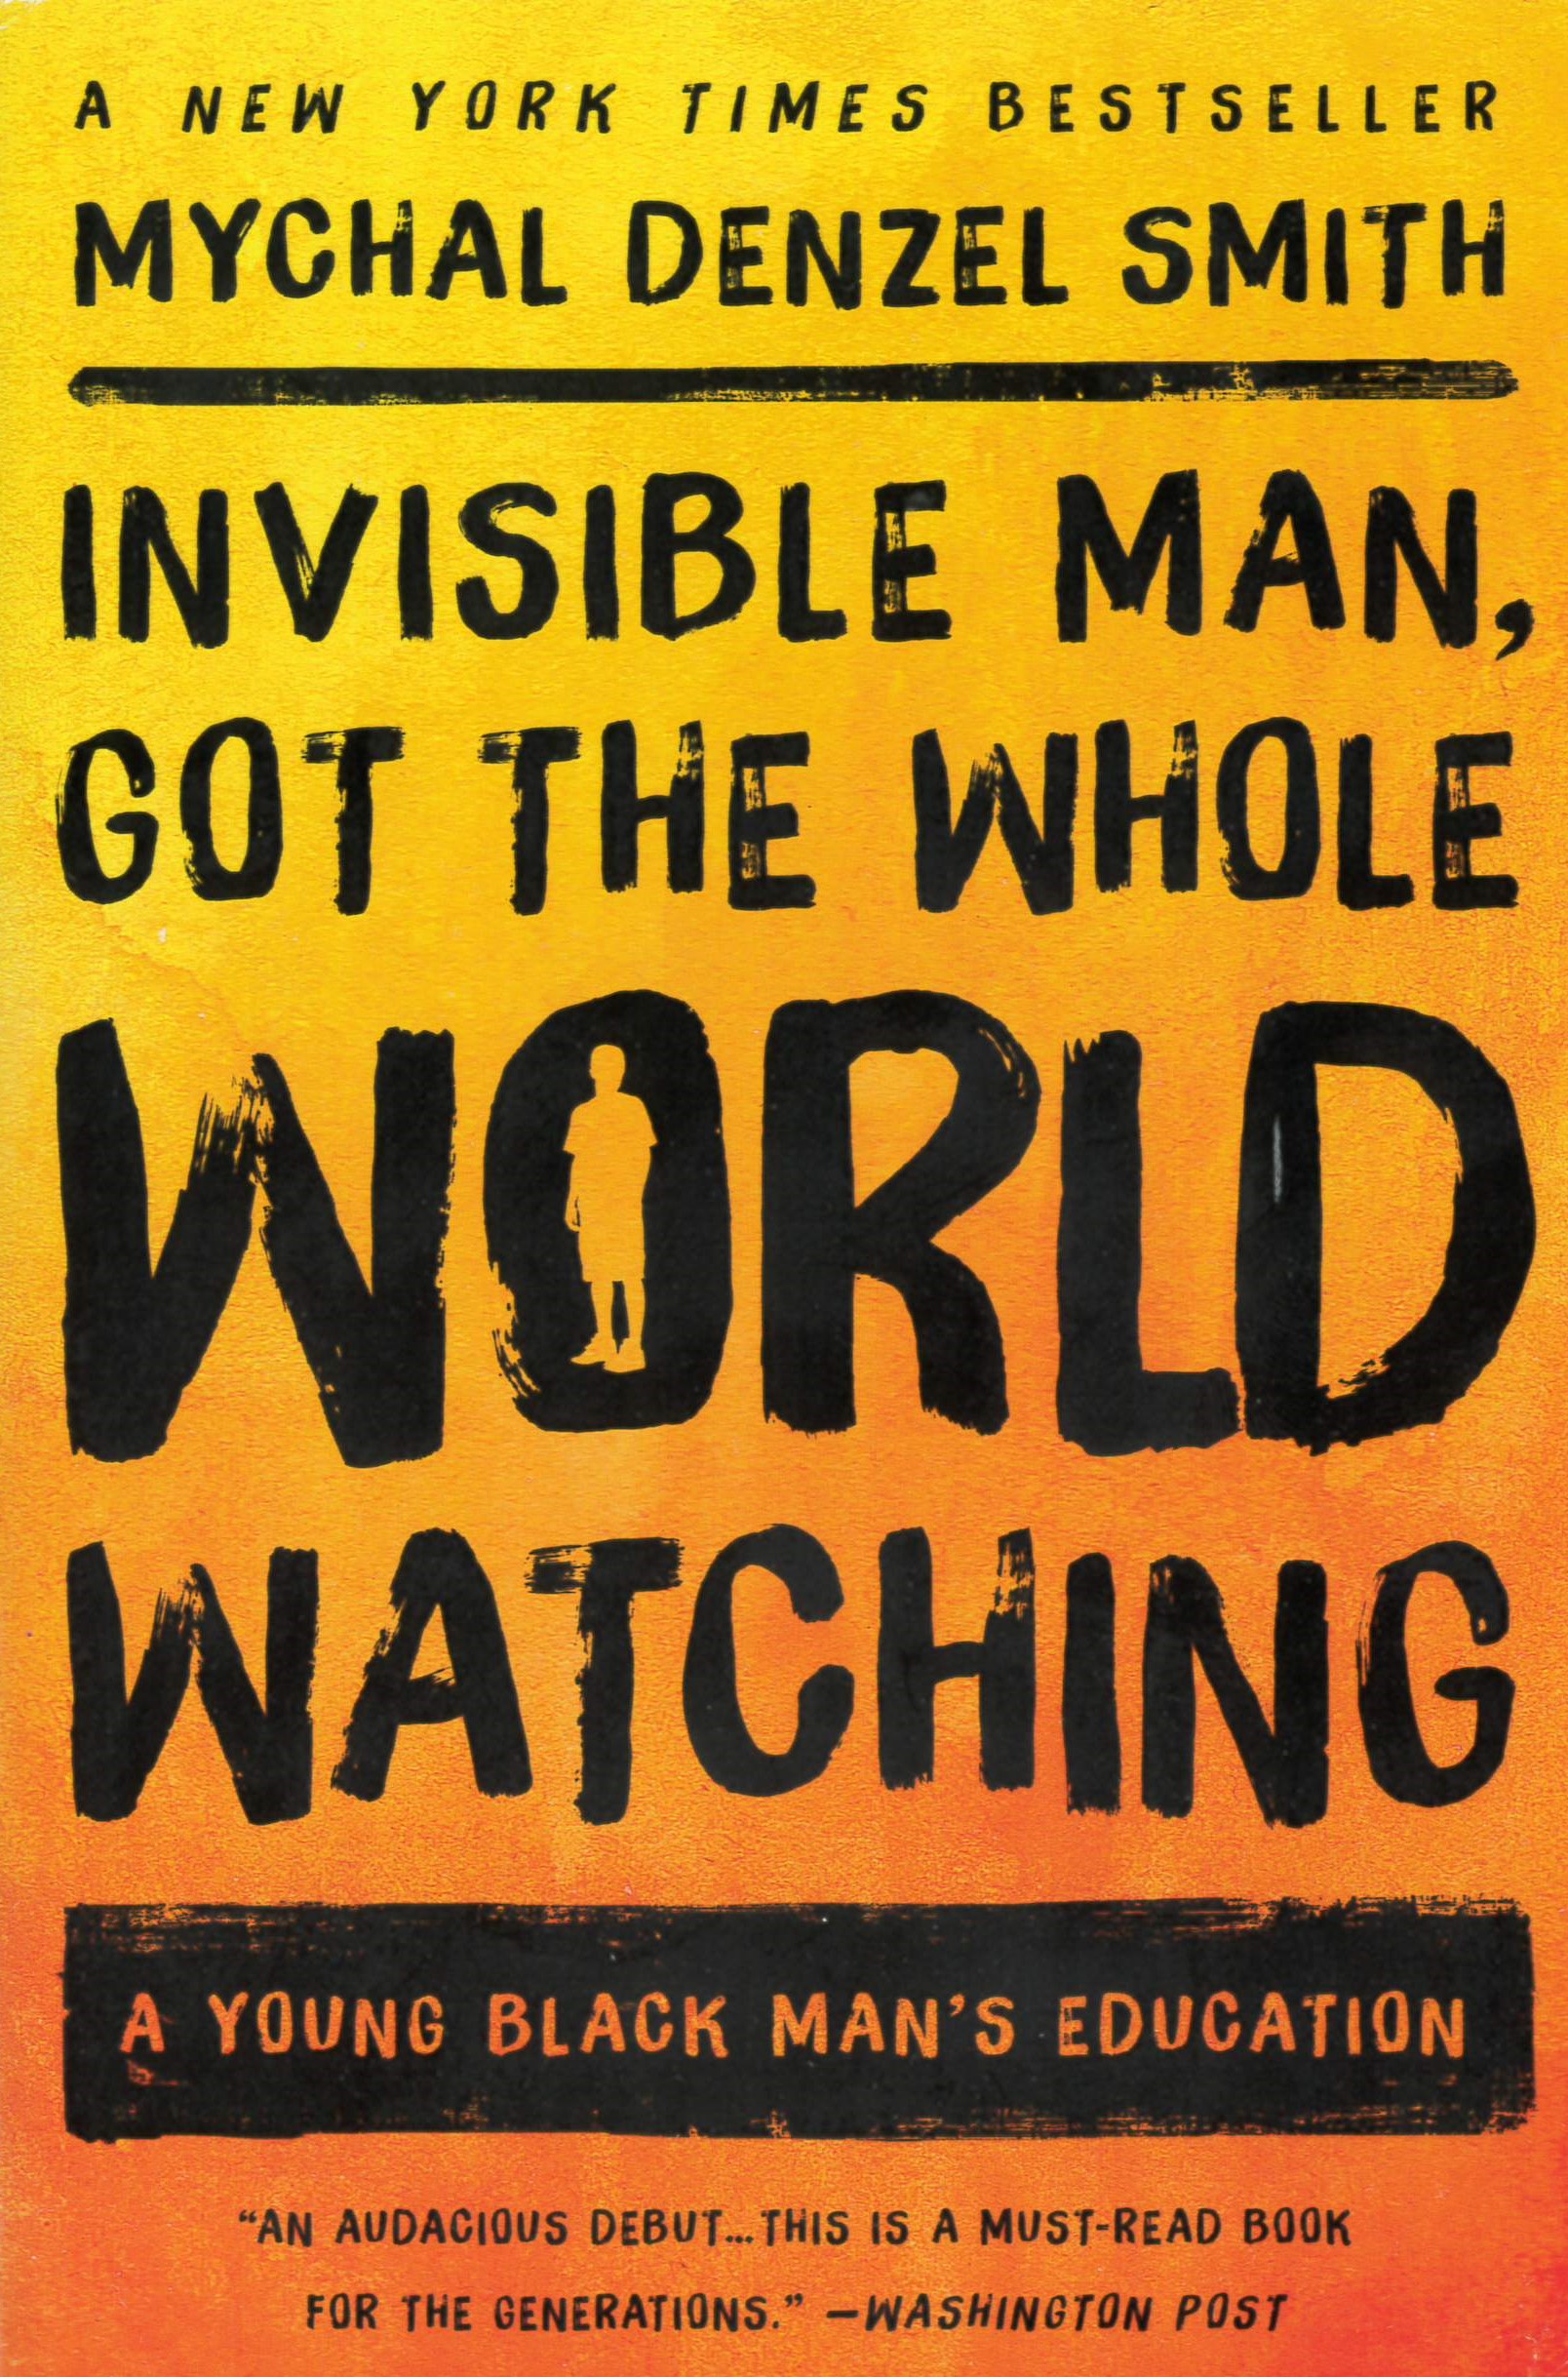 Invisible man, got the whole world watching : a young Black man